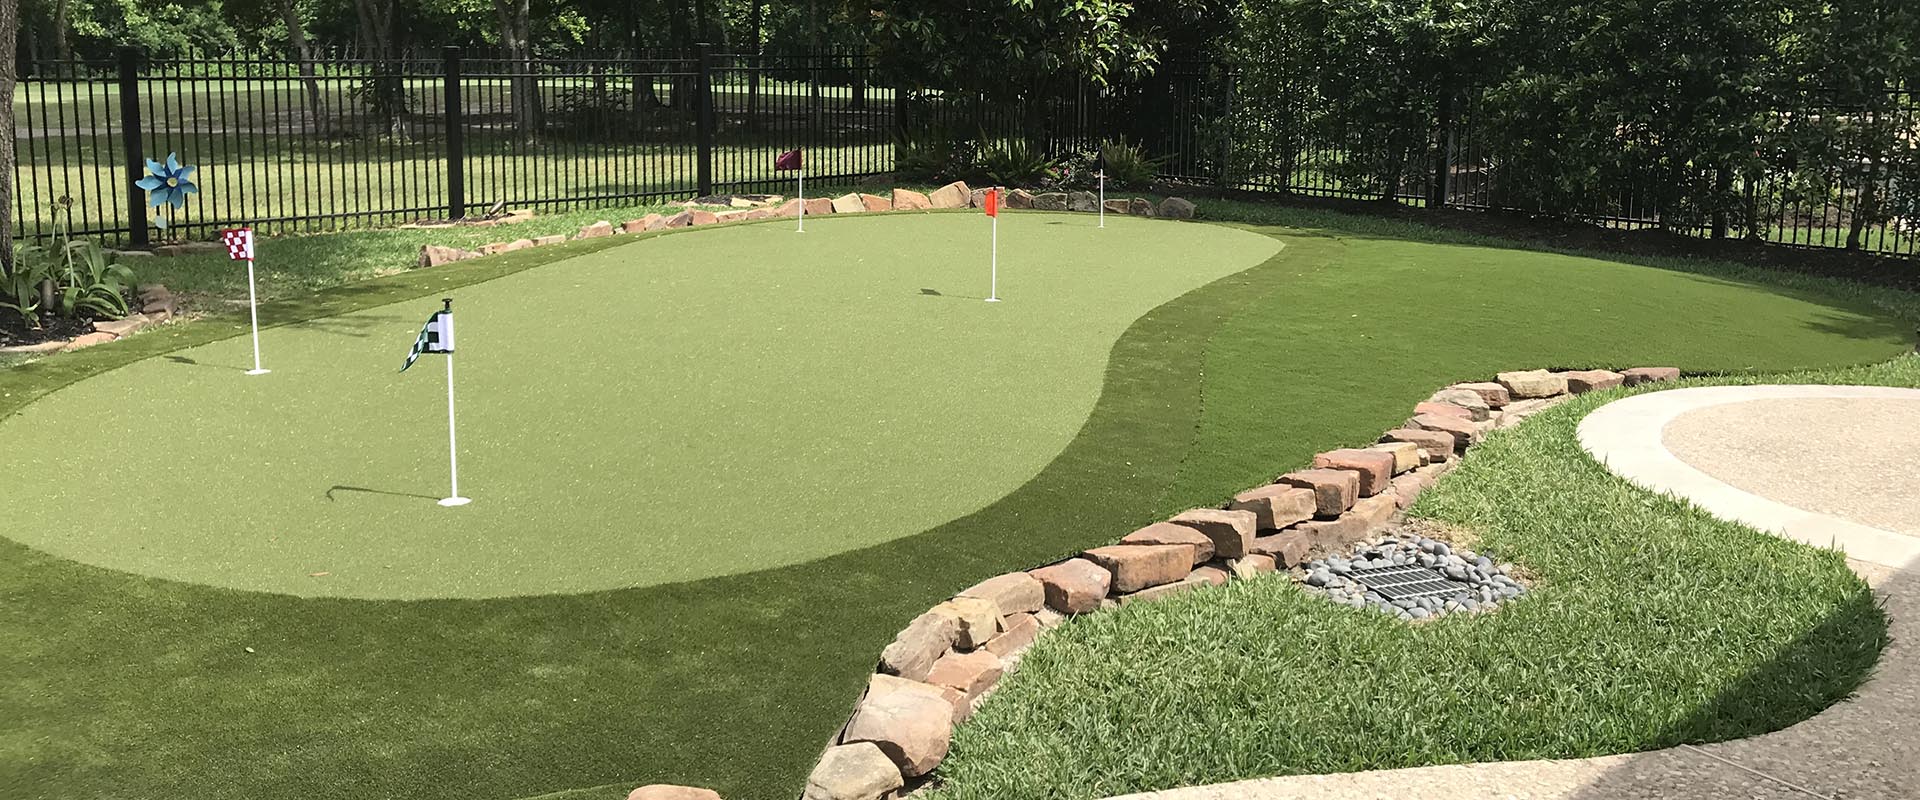 MIni golf course with artificial grass